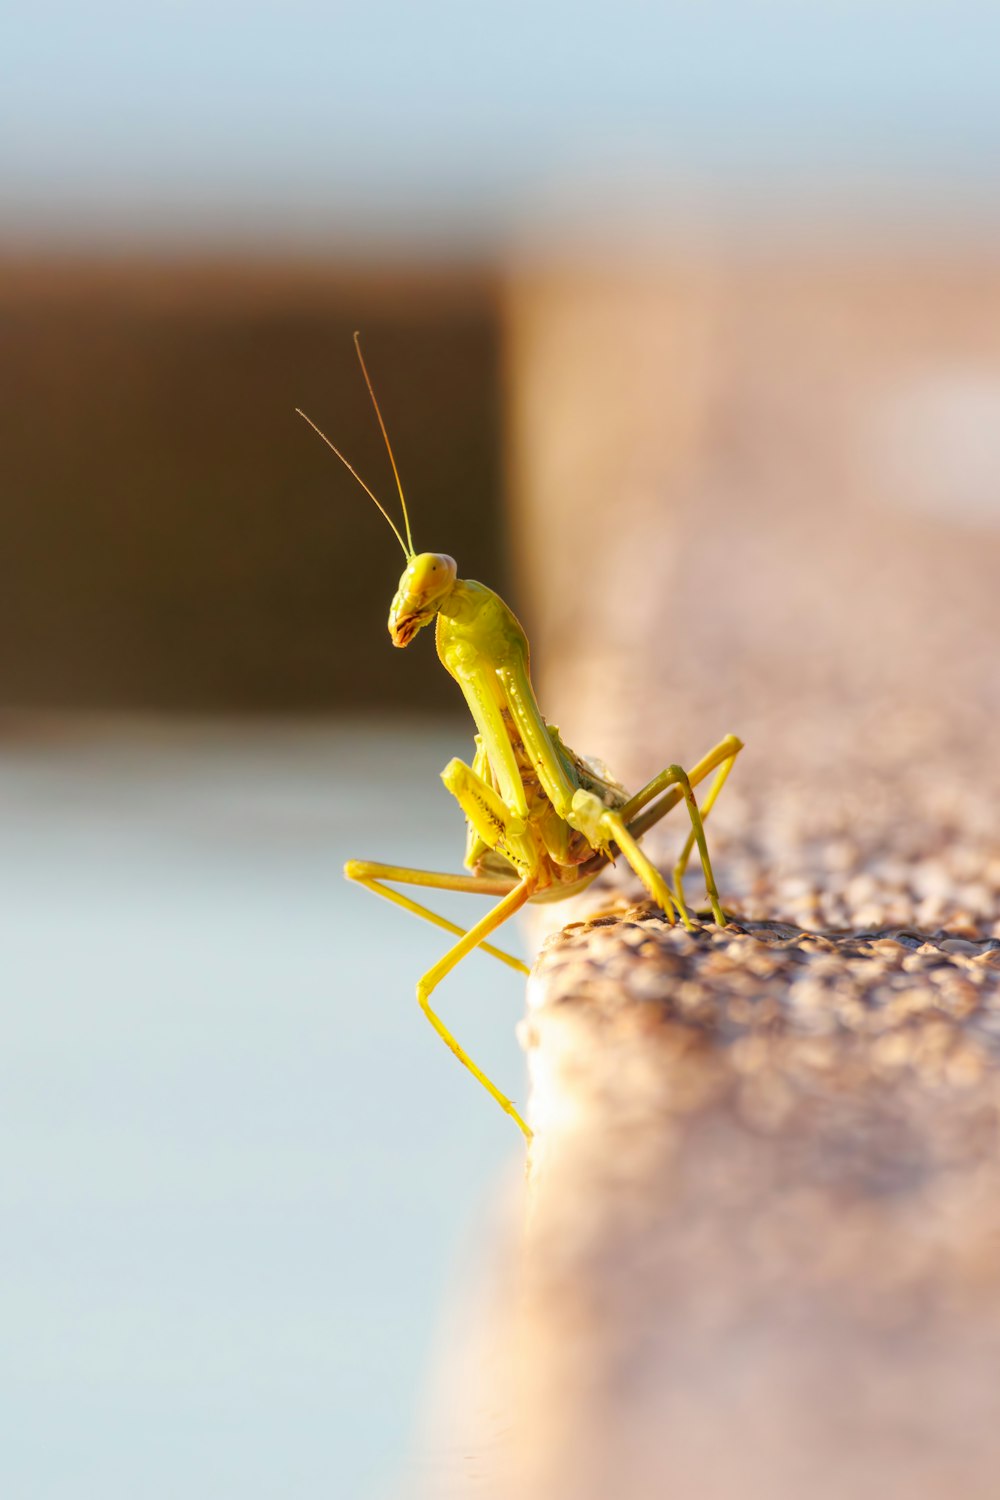 a close up of a praying mantissa on the ground